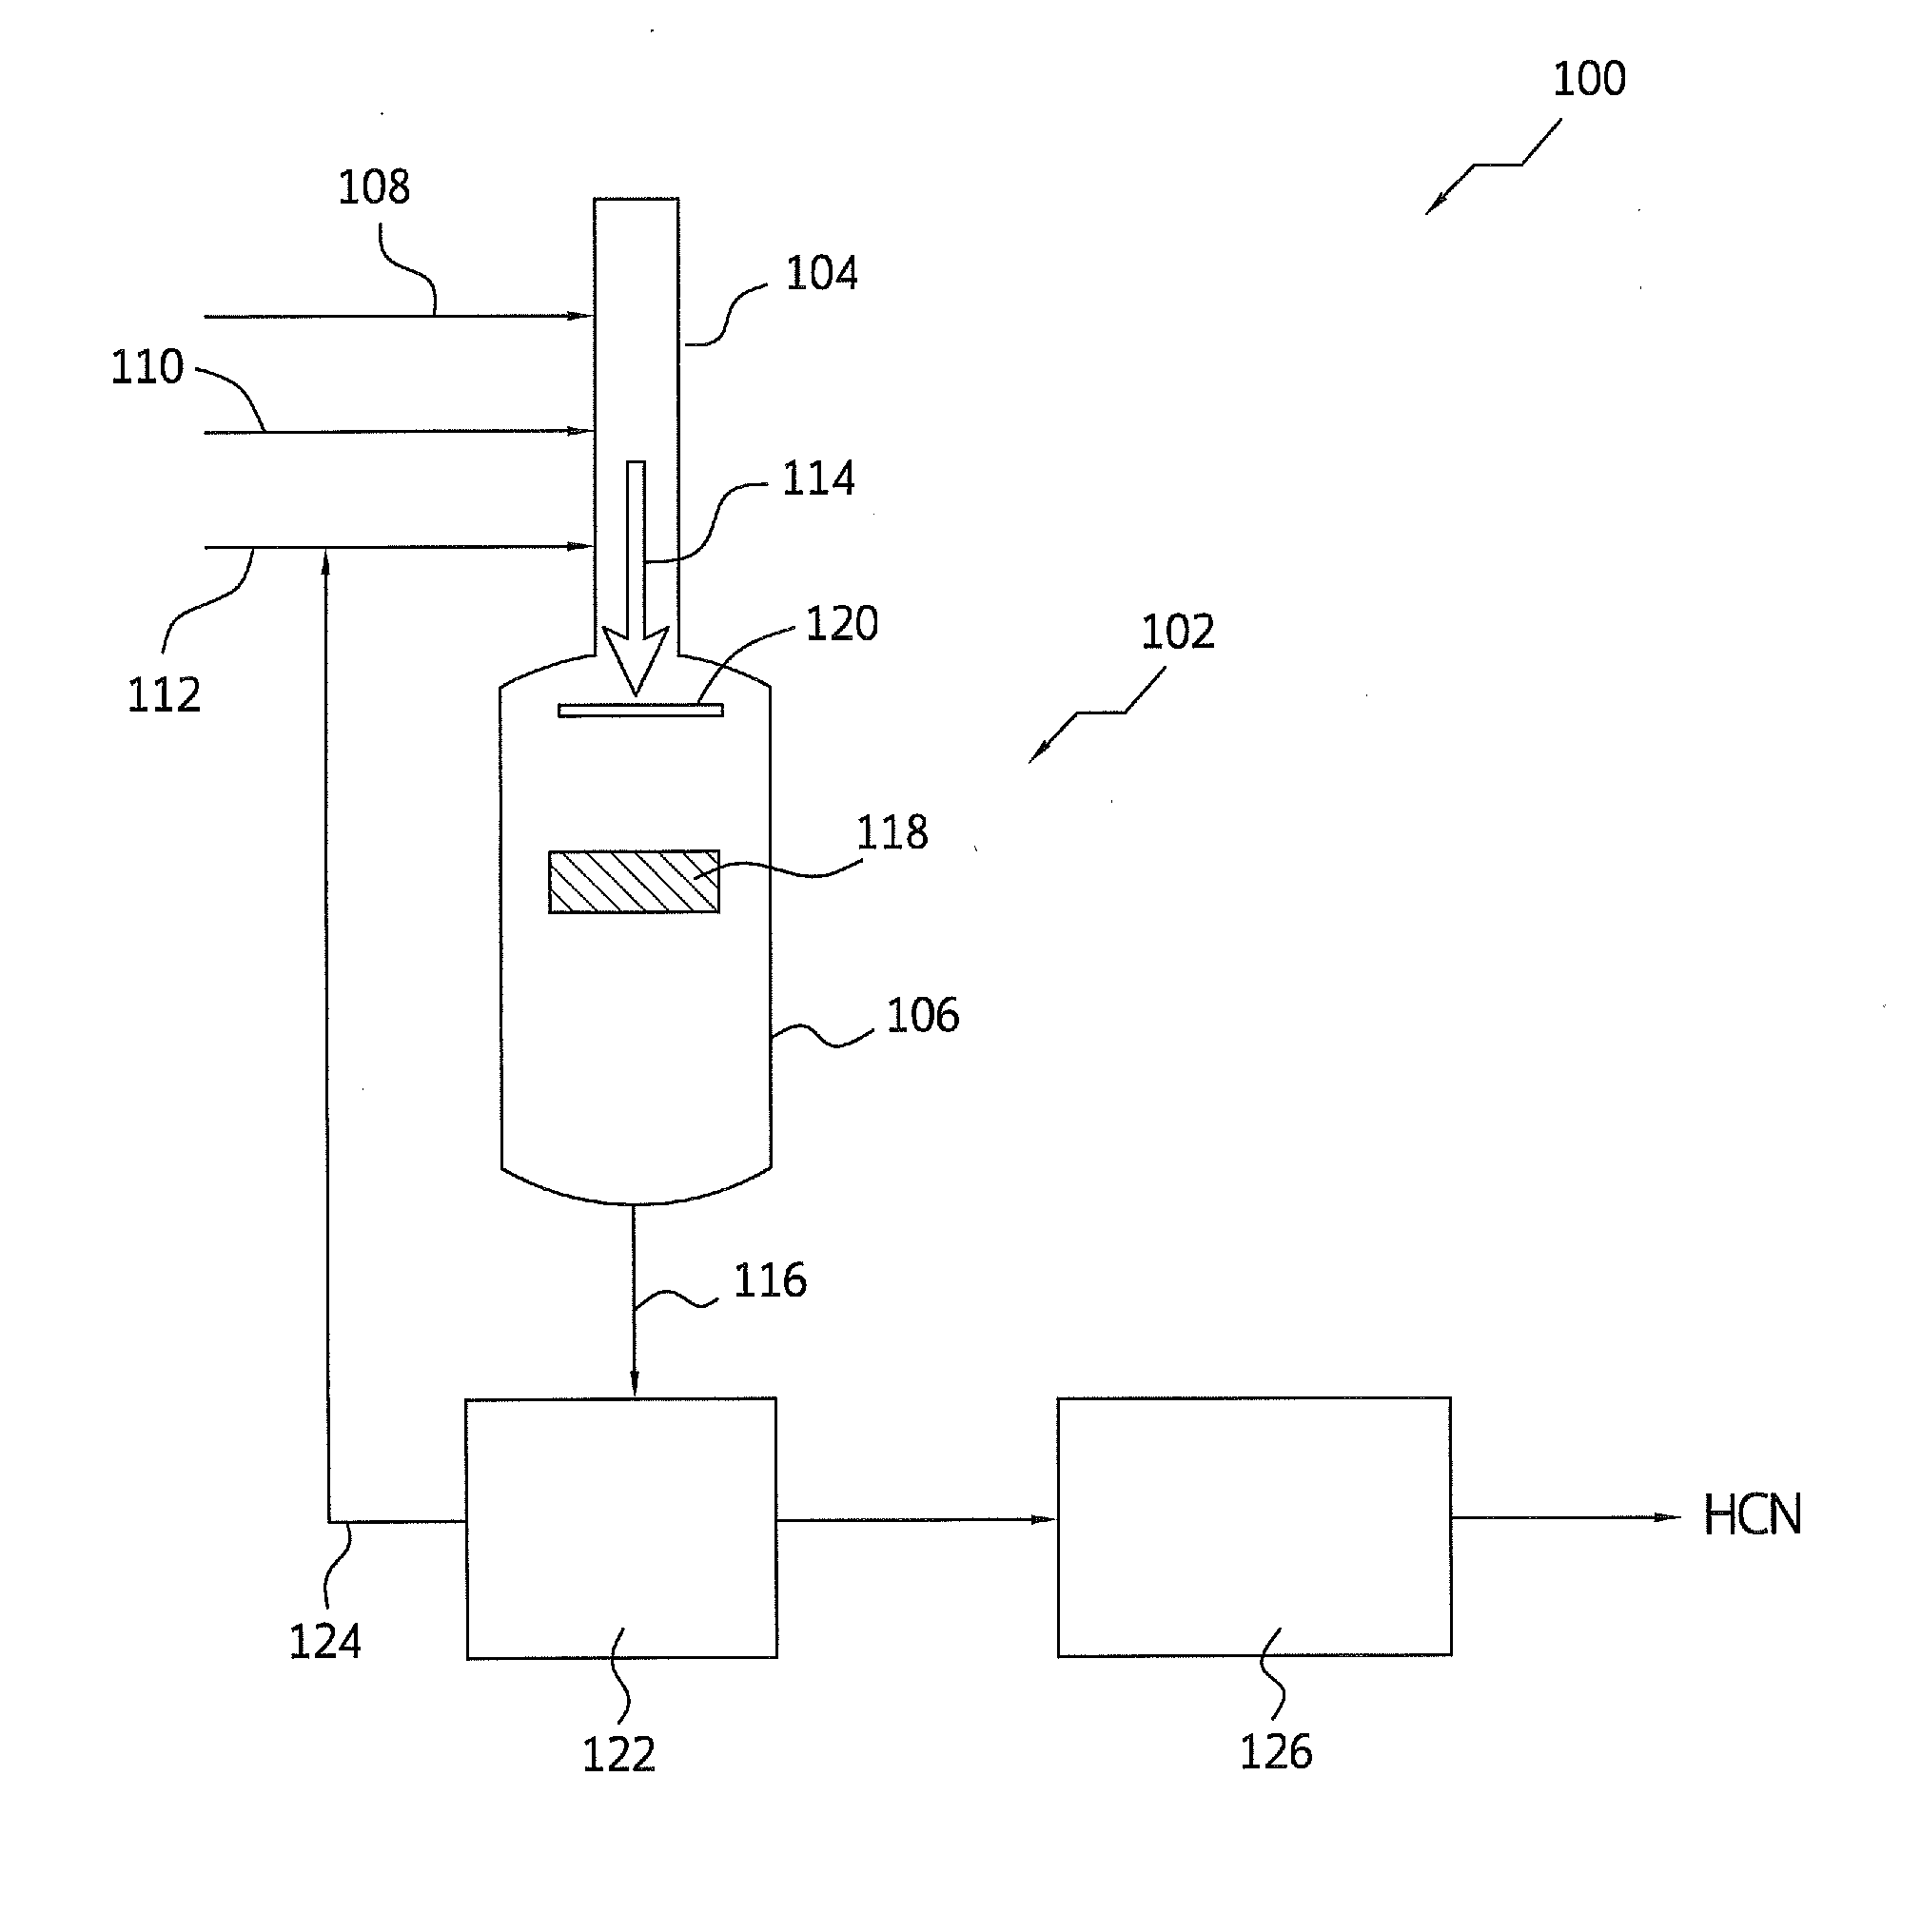 Processes for producing hydrogen cyanide using static mixer